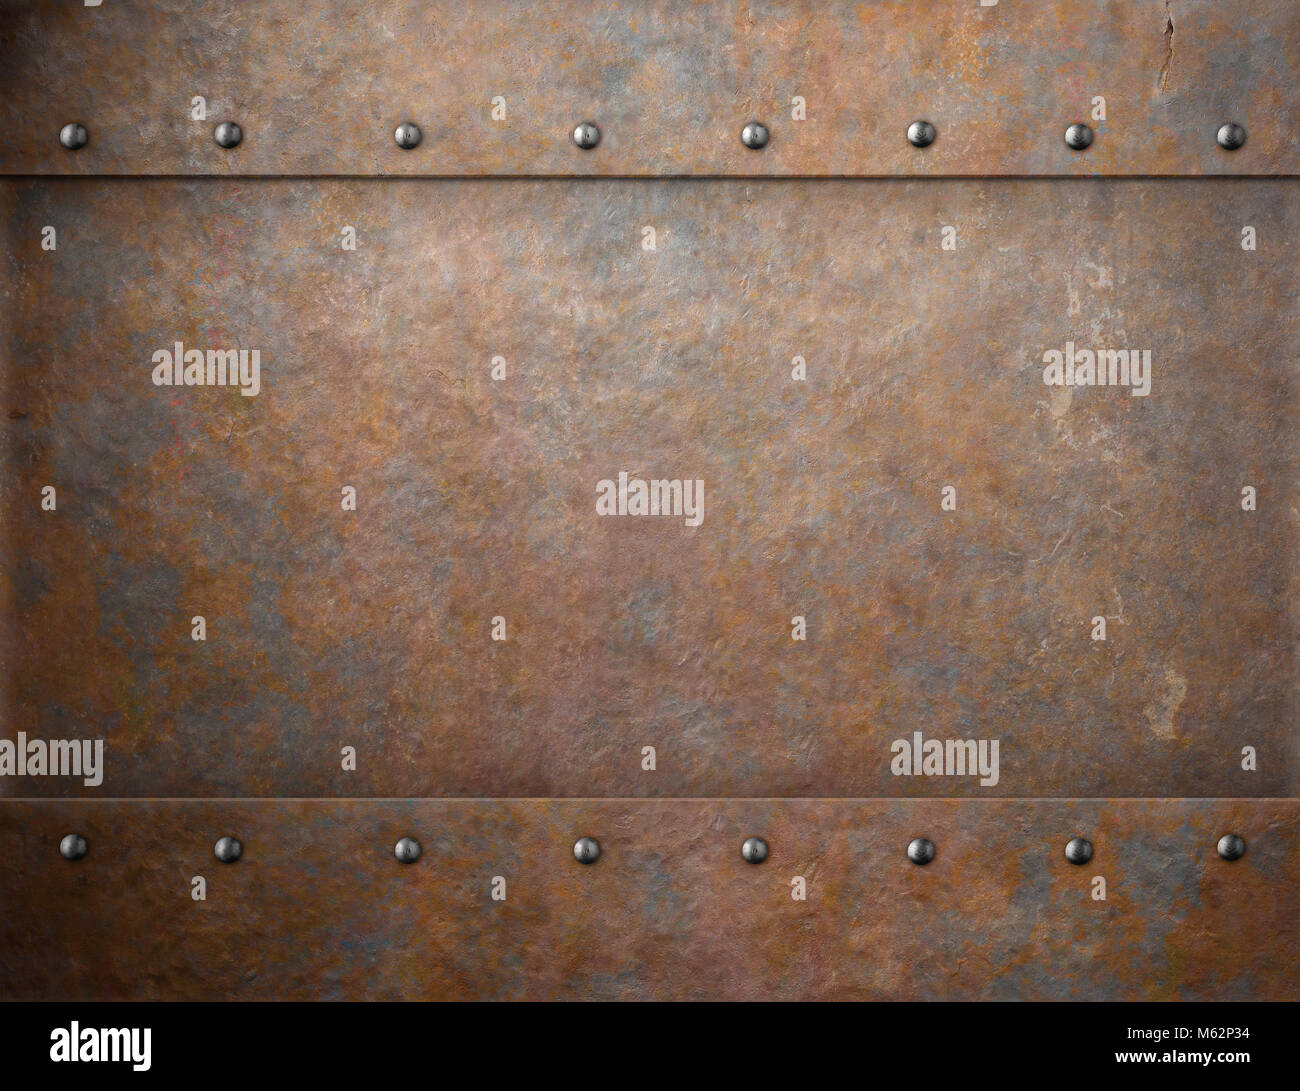 old rusty metal steam punk background Stock Photo